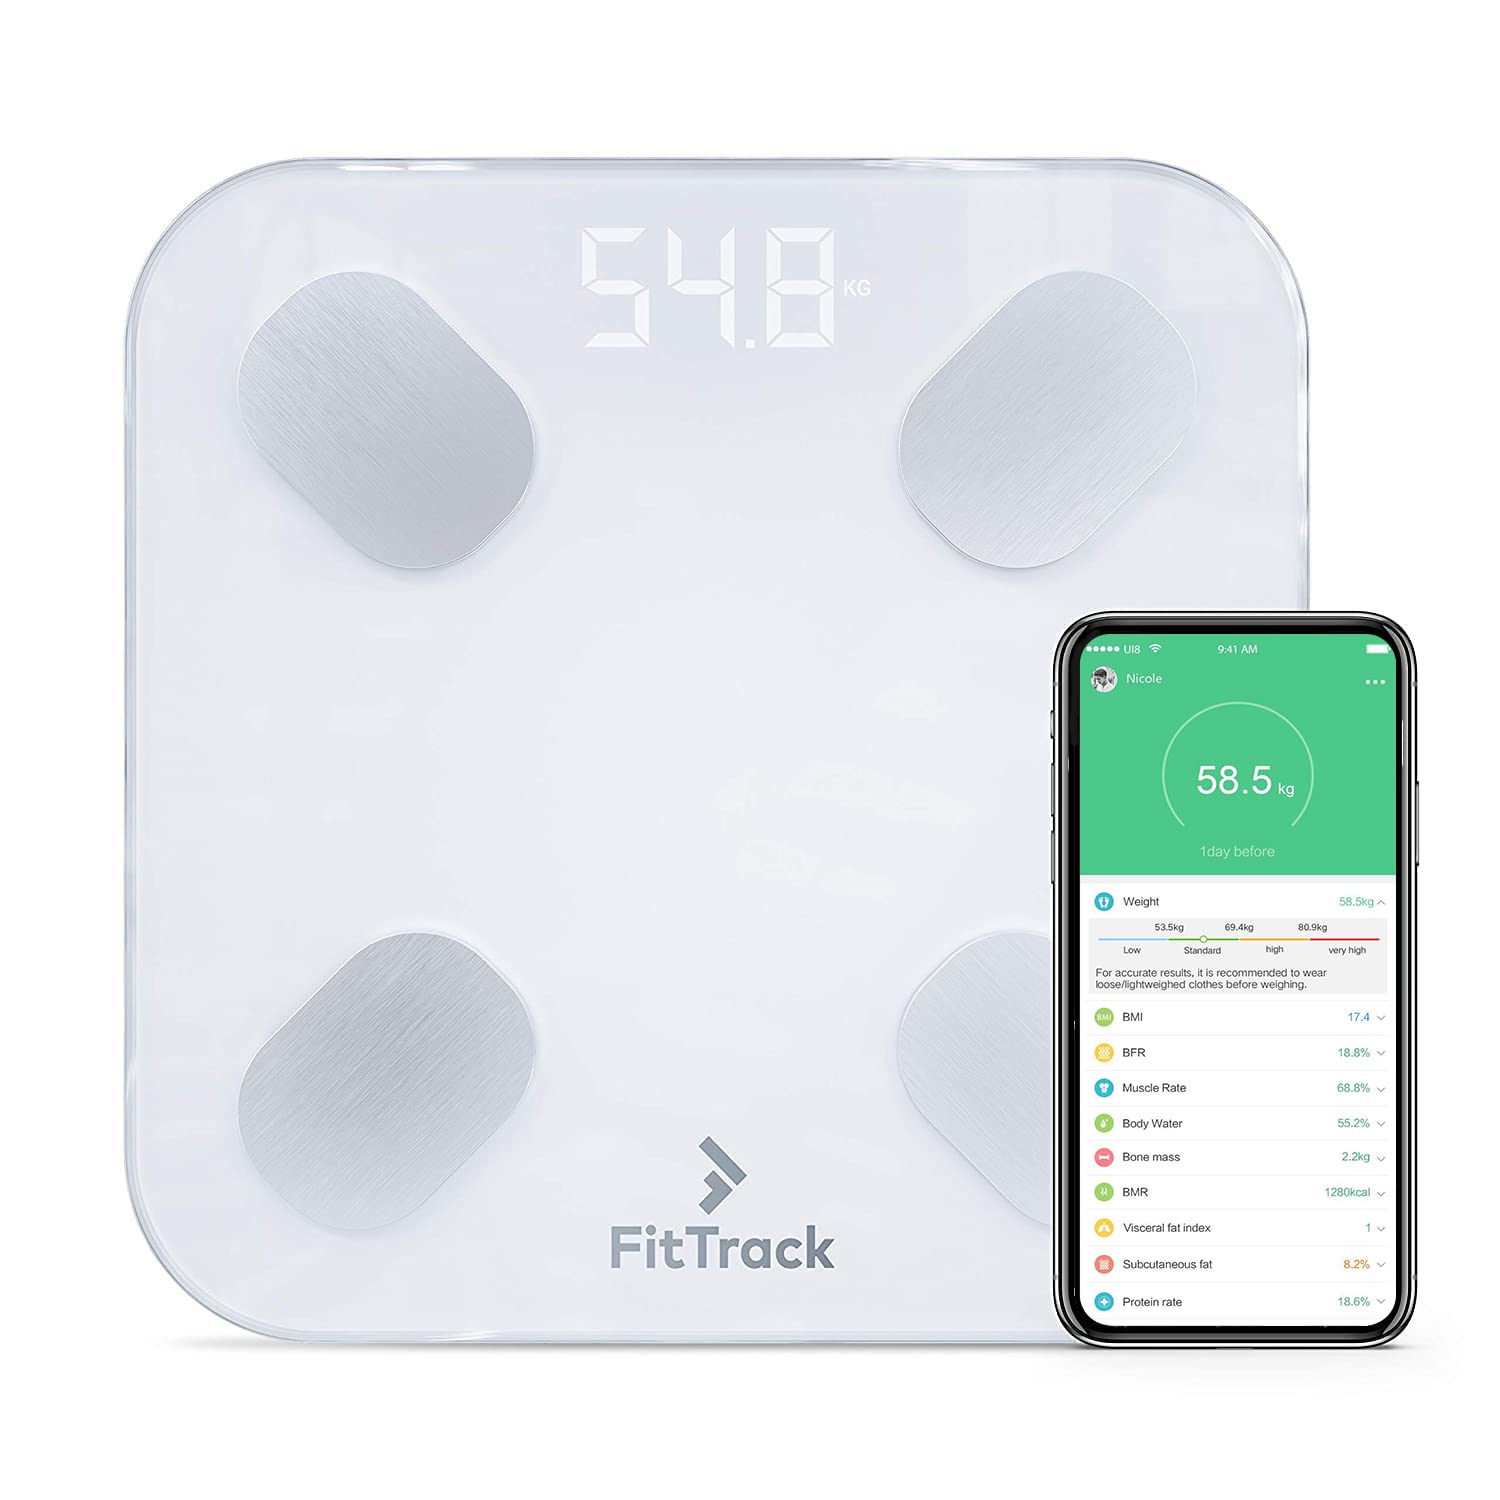 Bveiugn Personal Bathroom Scales Connects To Fitdays App Used